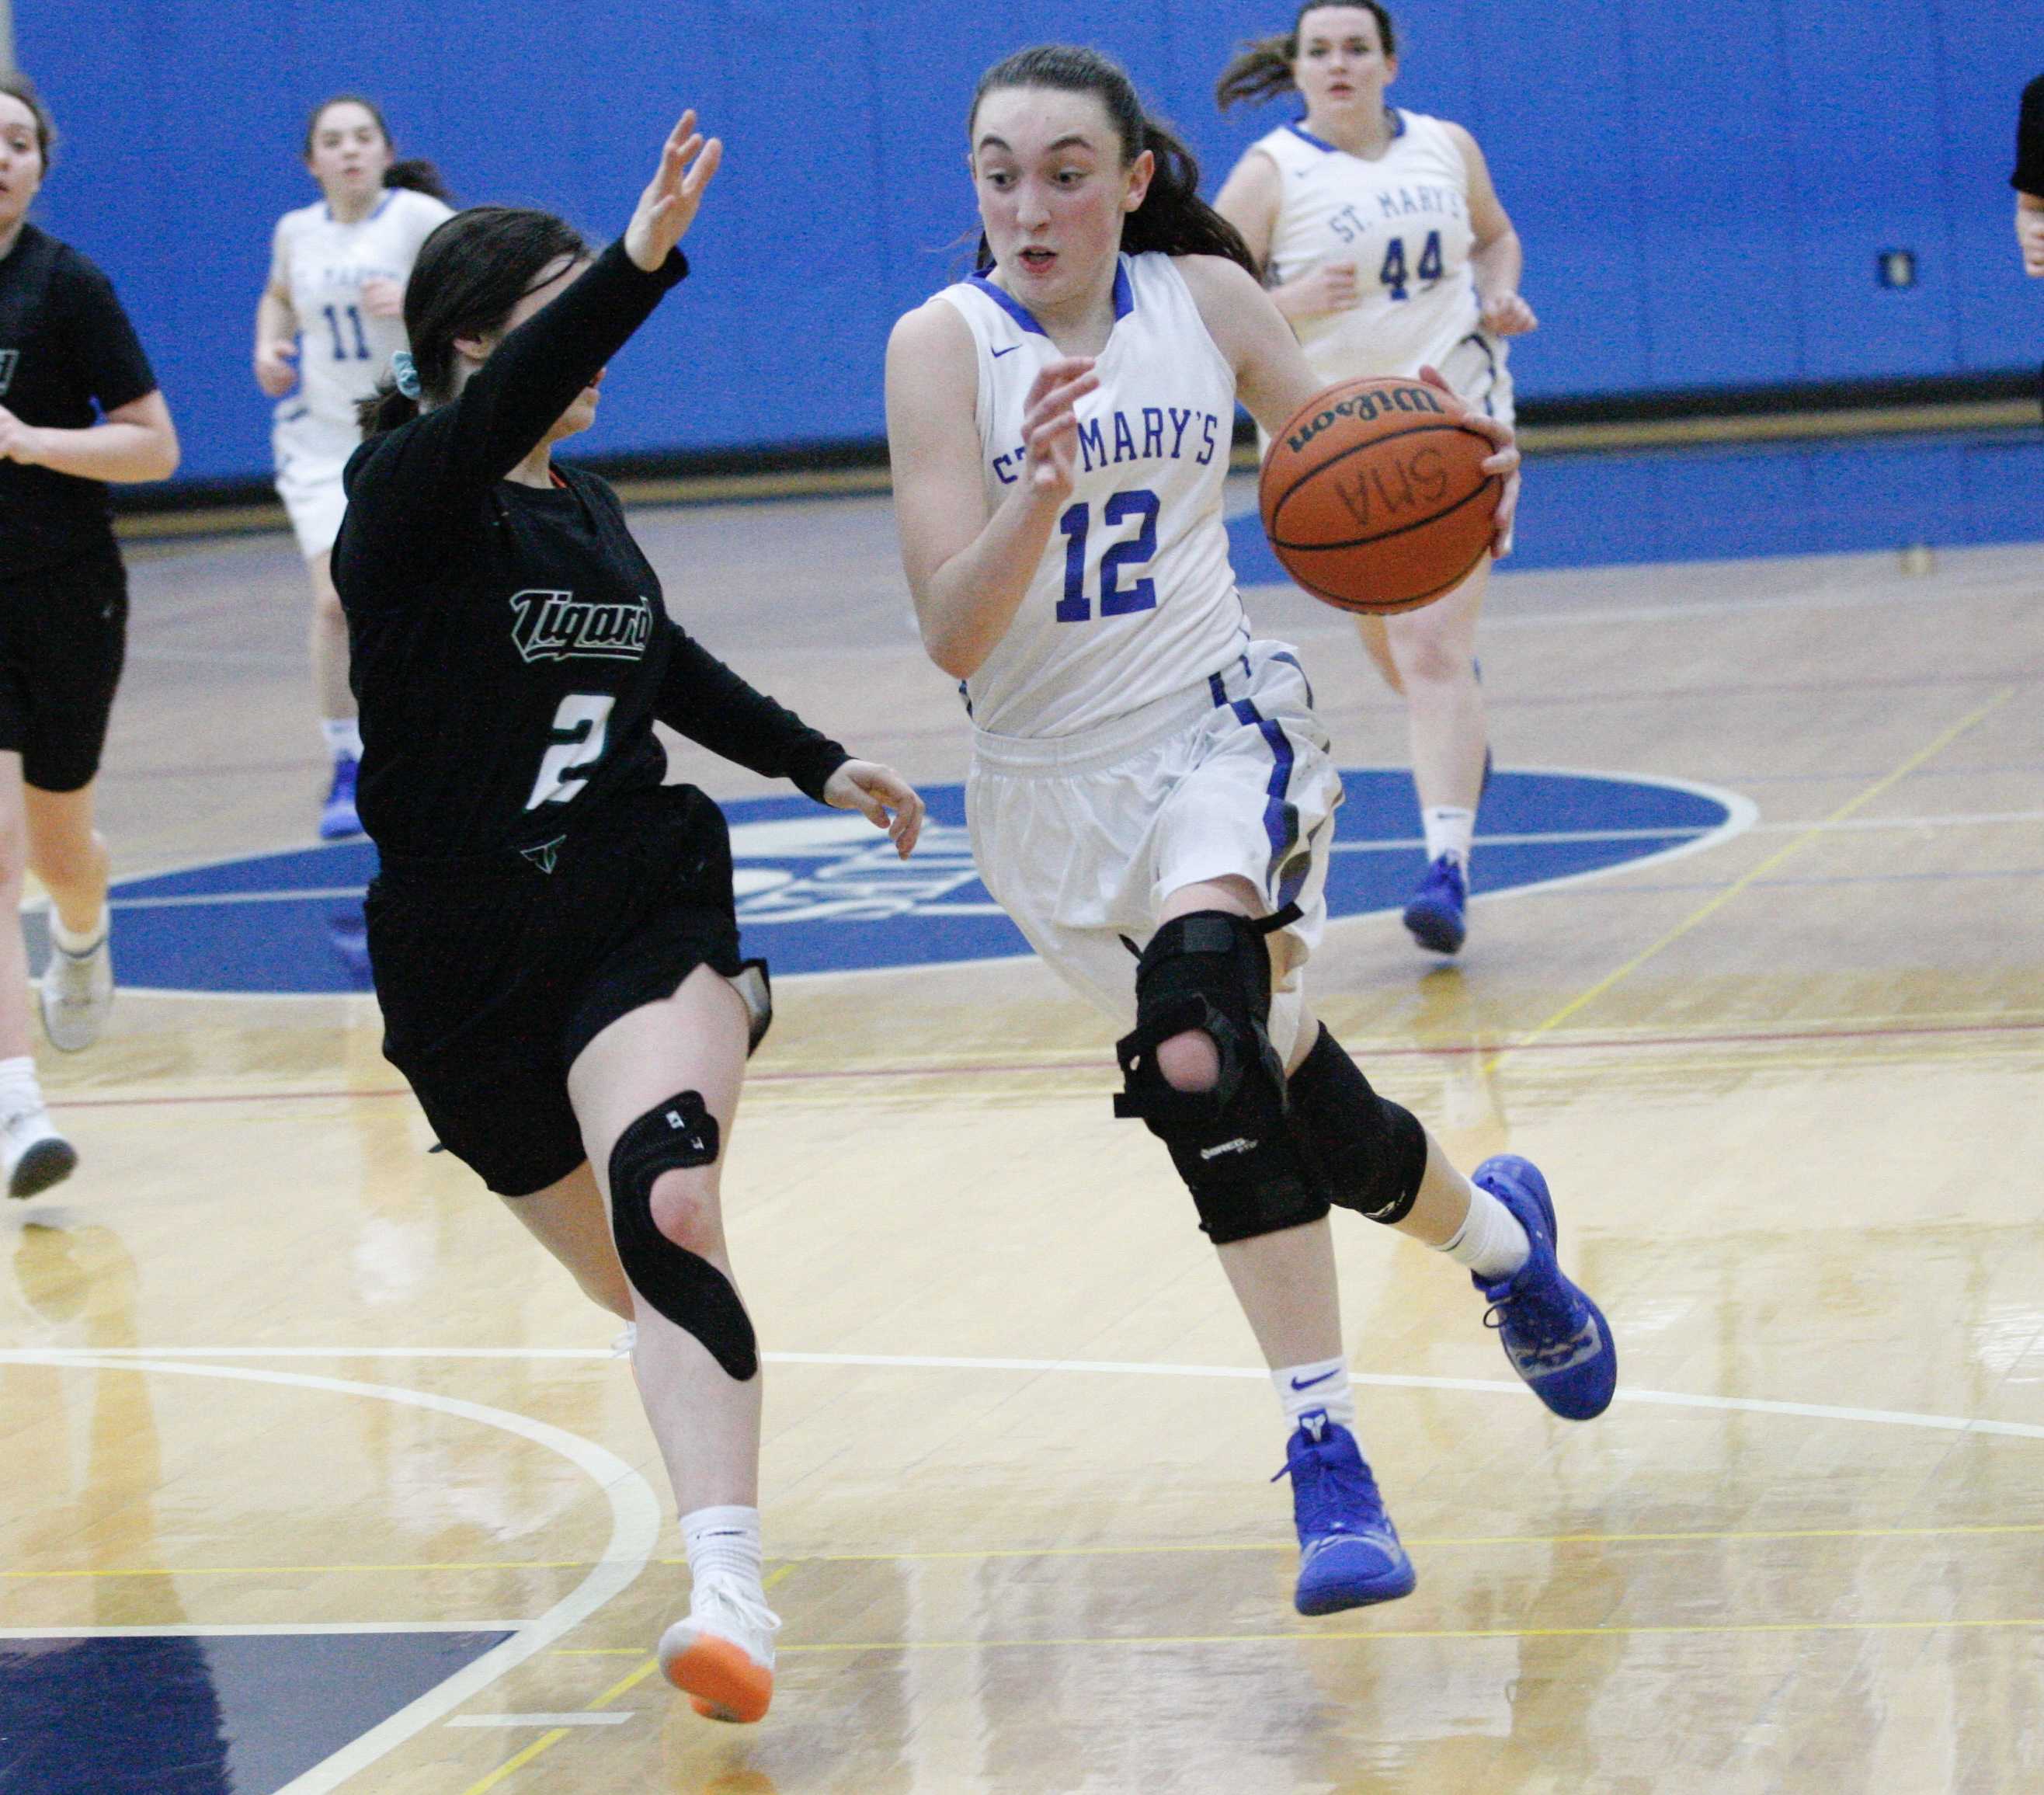 St. Mary's Academy's Anna Eddy drives into Tigard's Kennedy Brown on her way to a 14-point night. (Photo by Norm Maves Jr.)